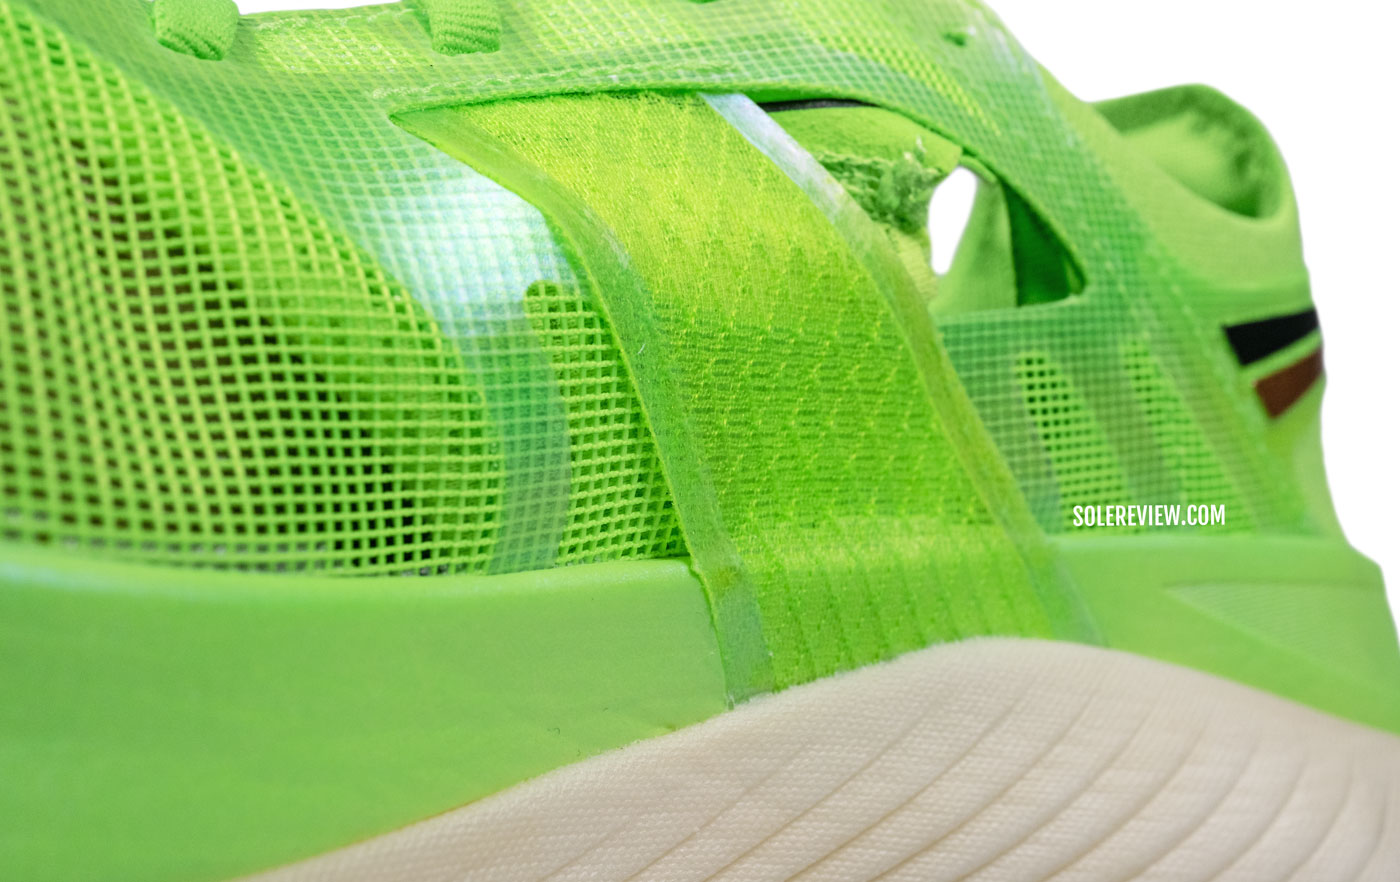 The midfoot strap of the Saucony Endorphin Elite.